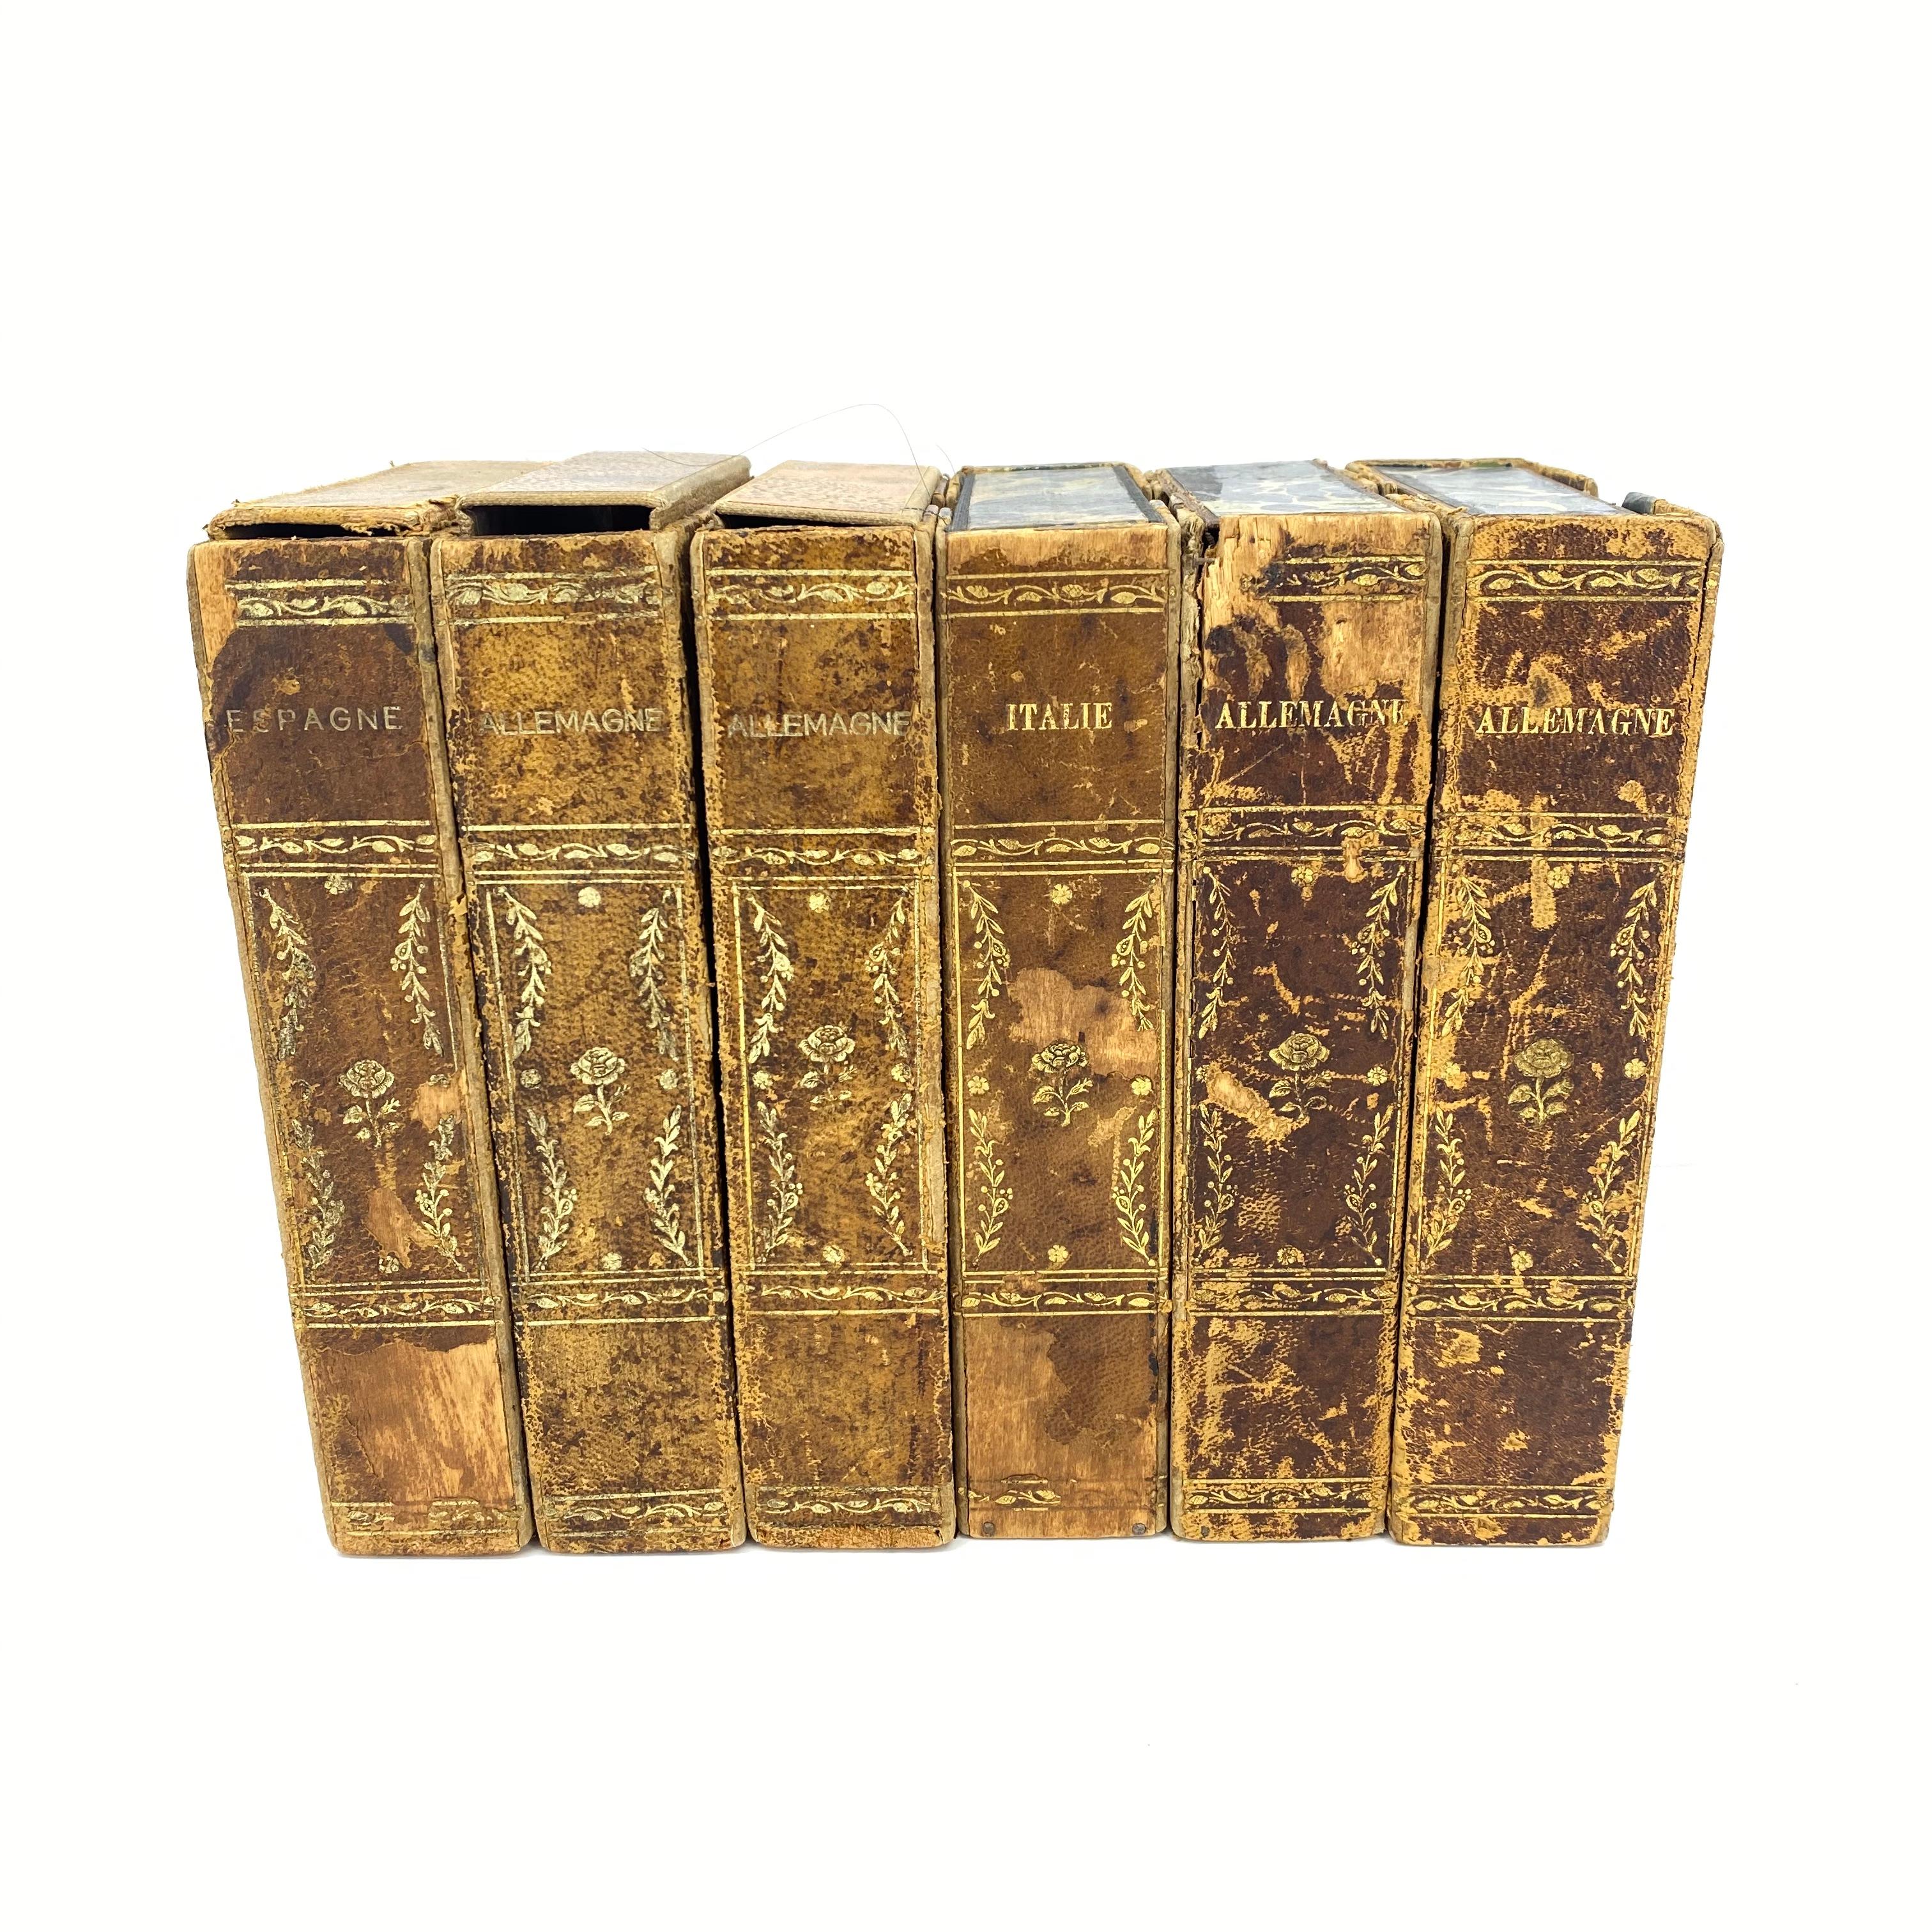 2 sets of 3 vintage leather-backed book boxes

This set consists of two sets of 3 book boxes. One set has the box-sides made in colorful blue faux marbled paper on board, the other 3 books in brown faux marbled paper.

Each book measures depth